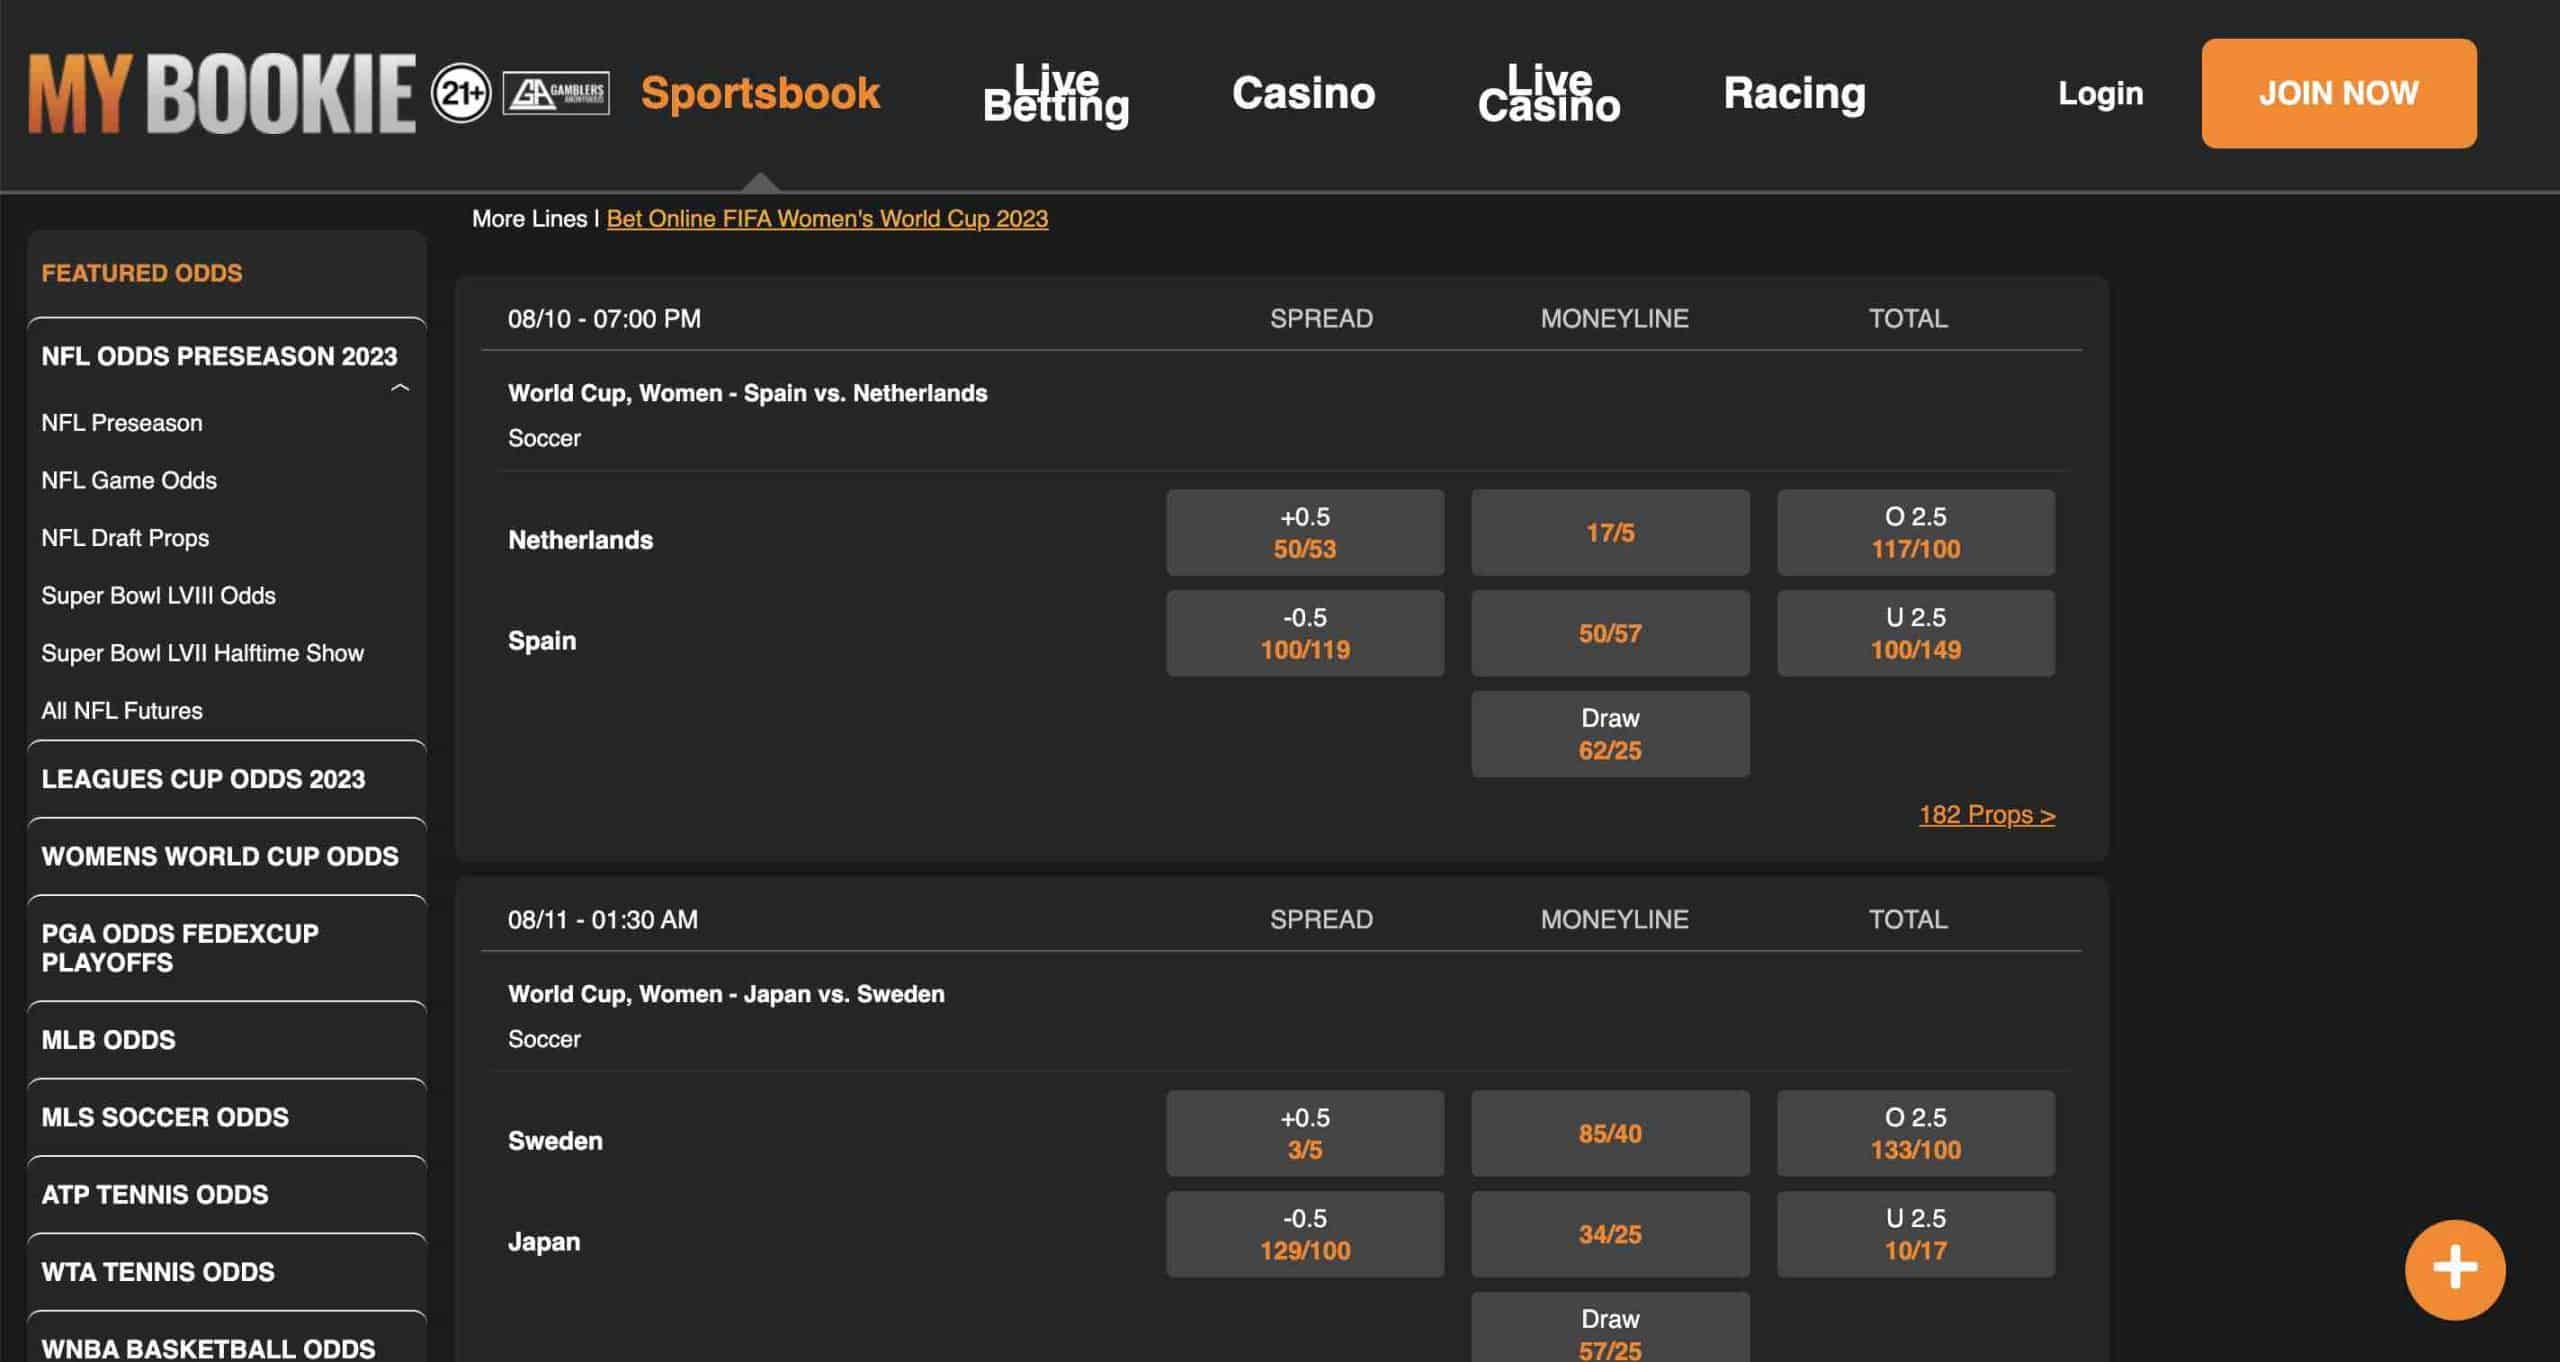 A screenshot of the odds for the main markets on two Women's World Cup matches in the Fractional format